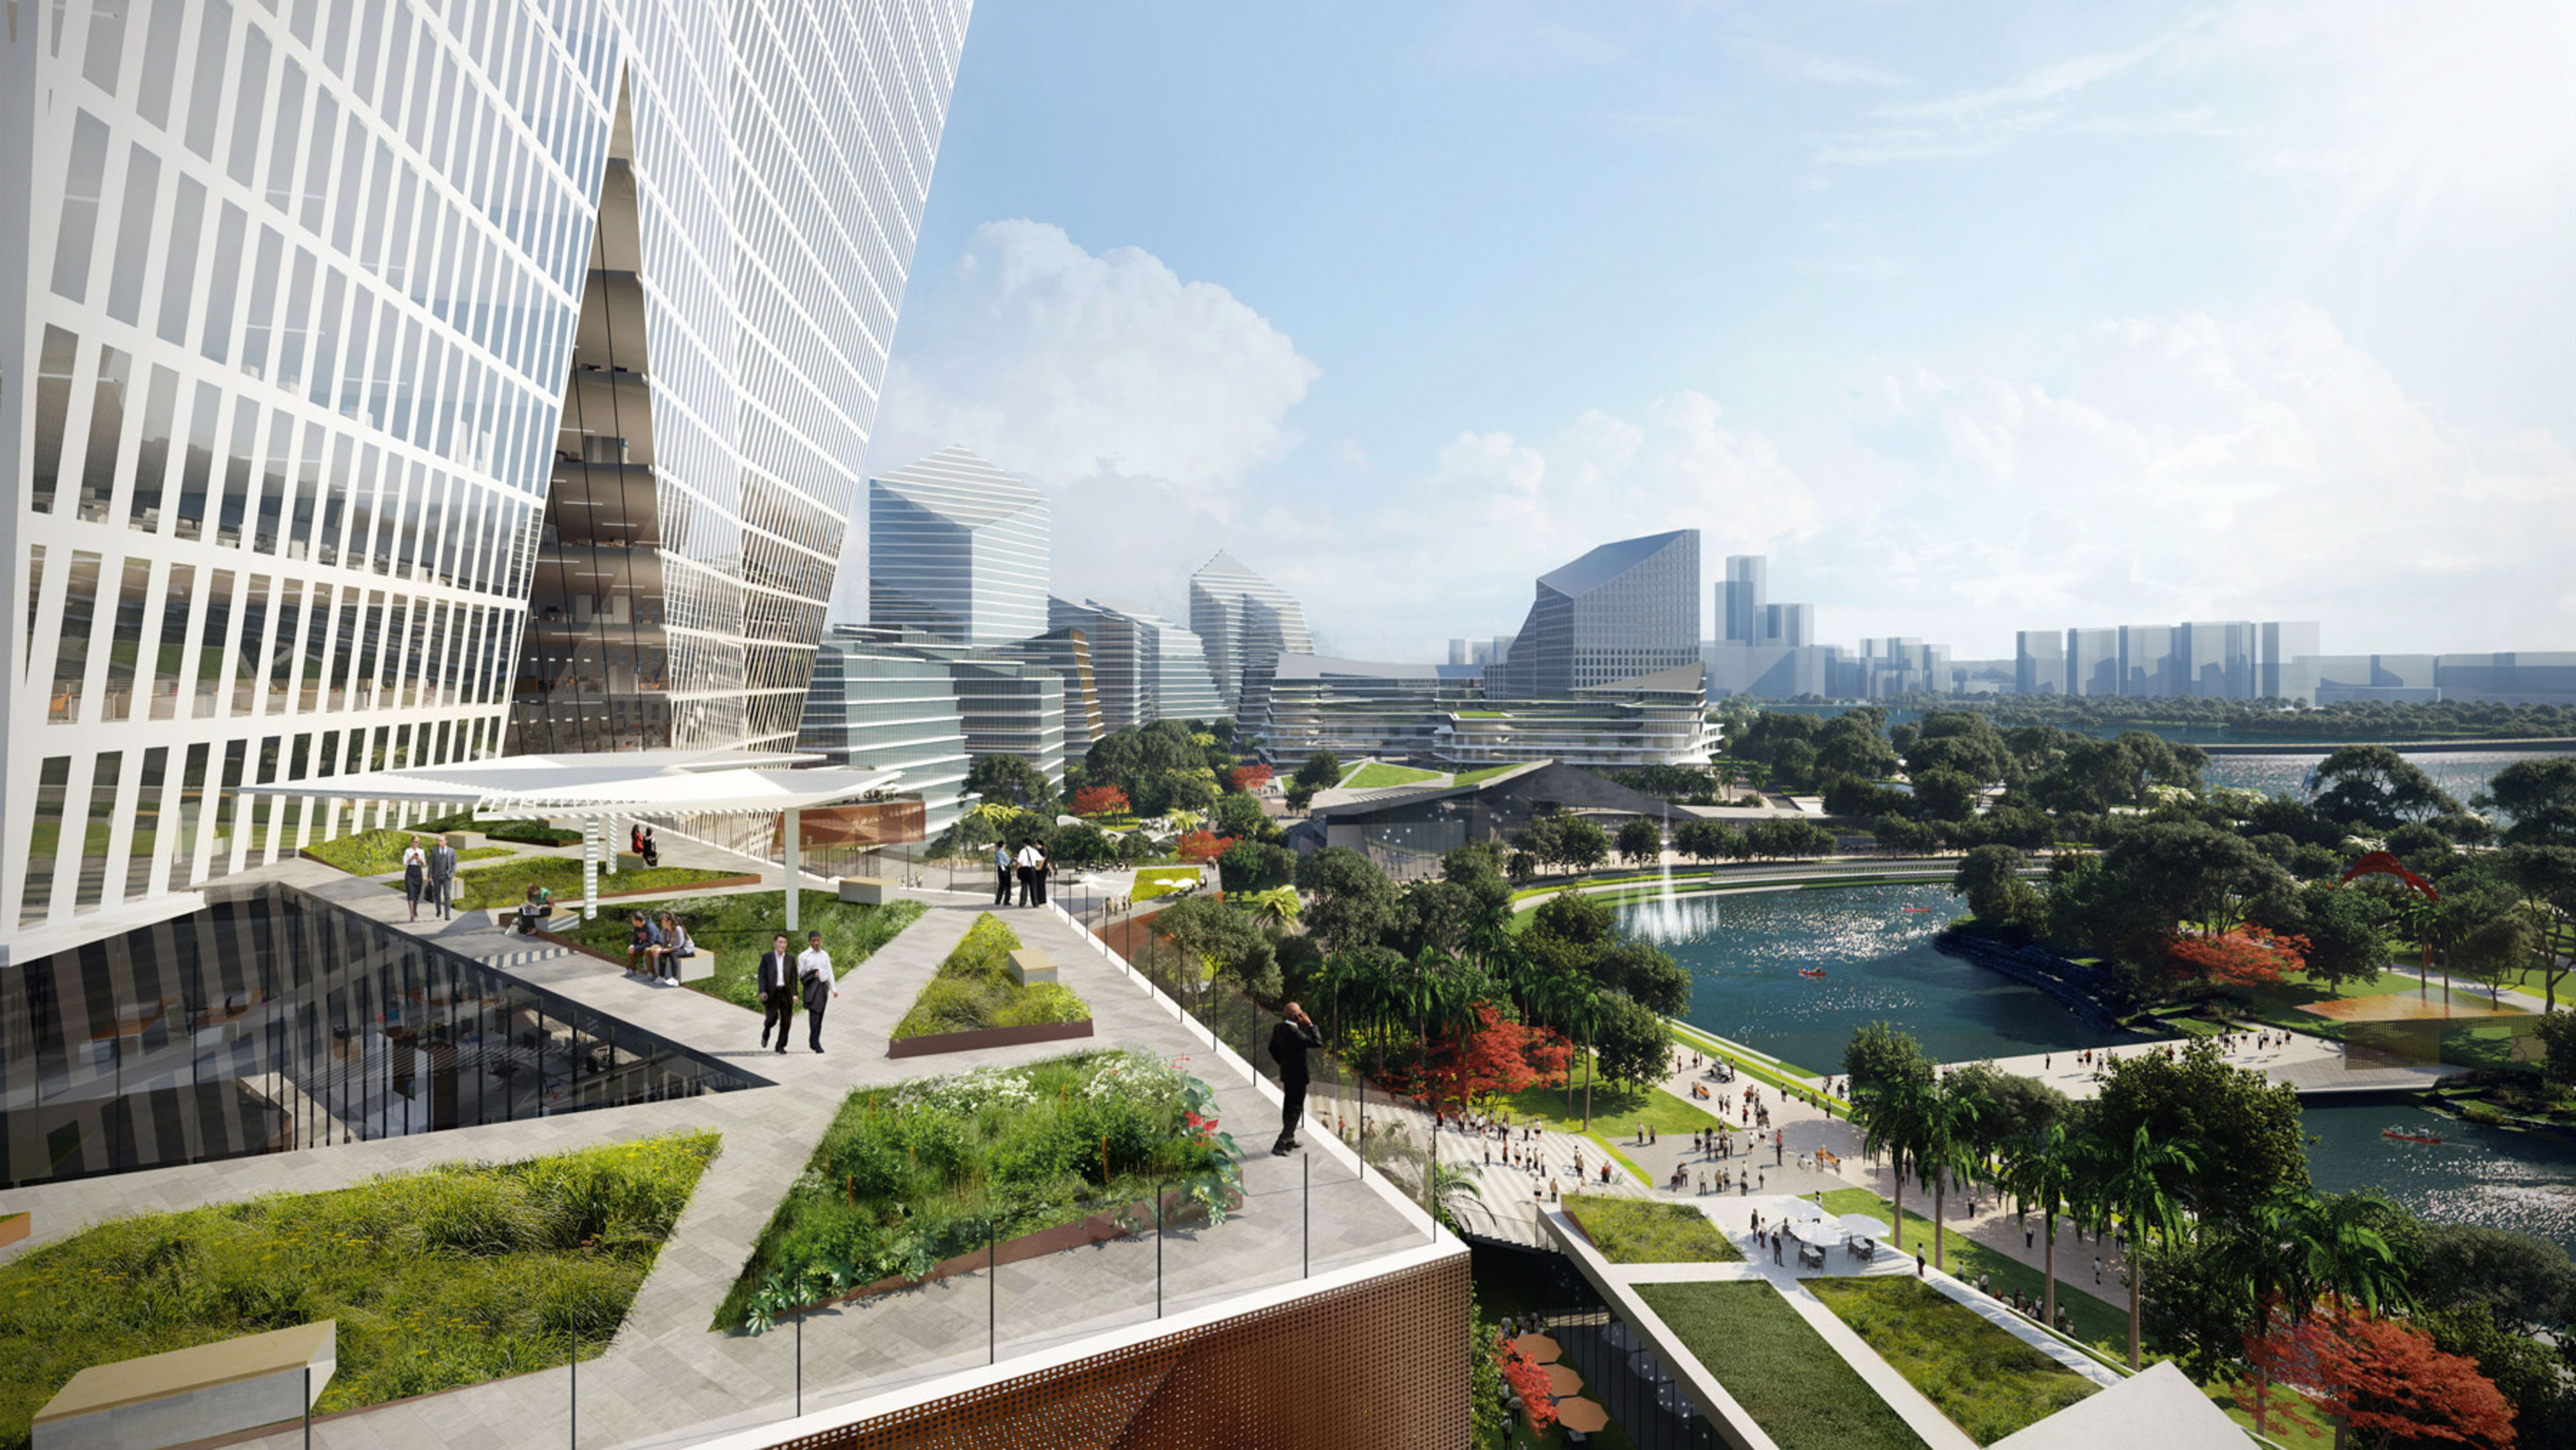 This new car-free district in Shenzhen is the size of midtown Manhattan